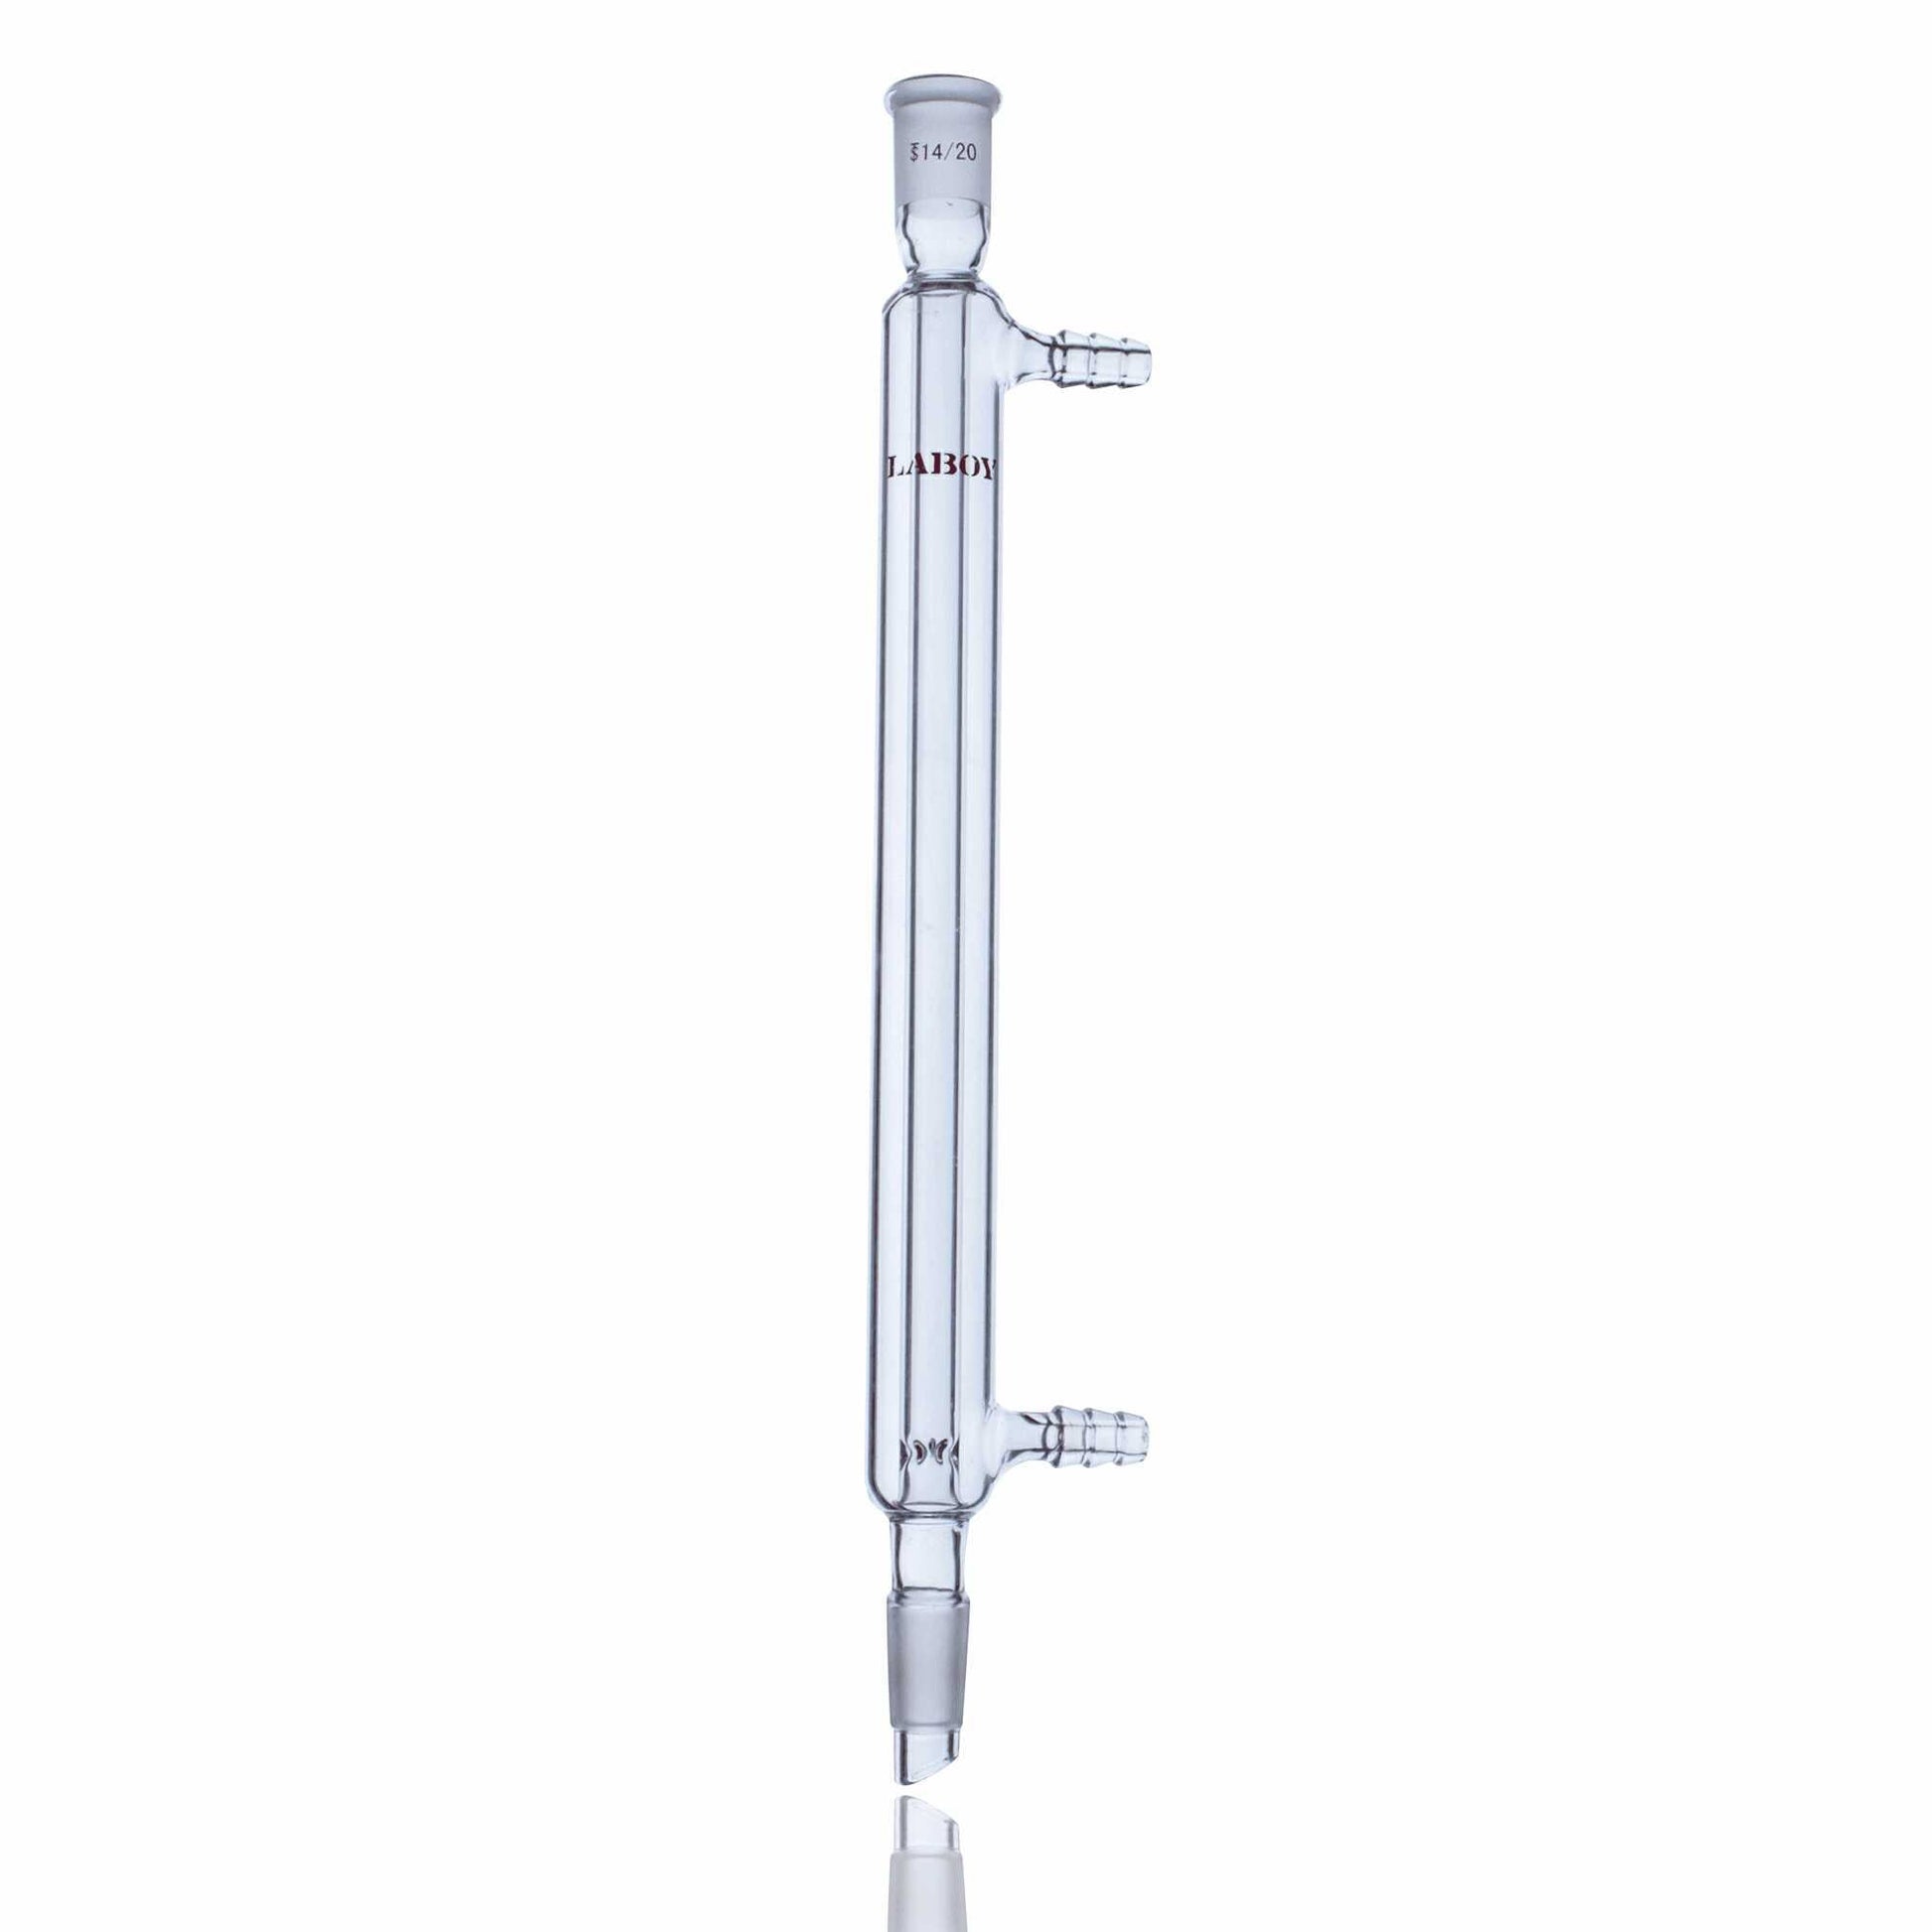 Glass Distillation Condenser Vacuum Jacketed with Taper Joints and Hose Connections - Scienmart